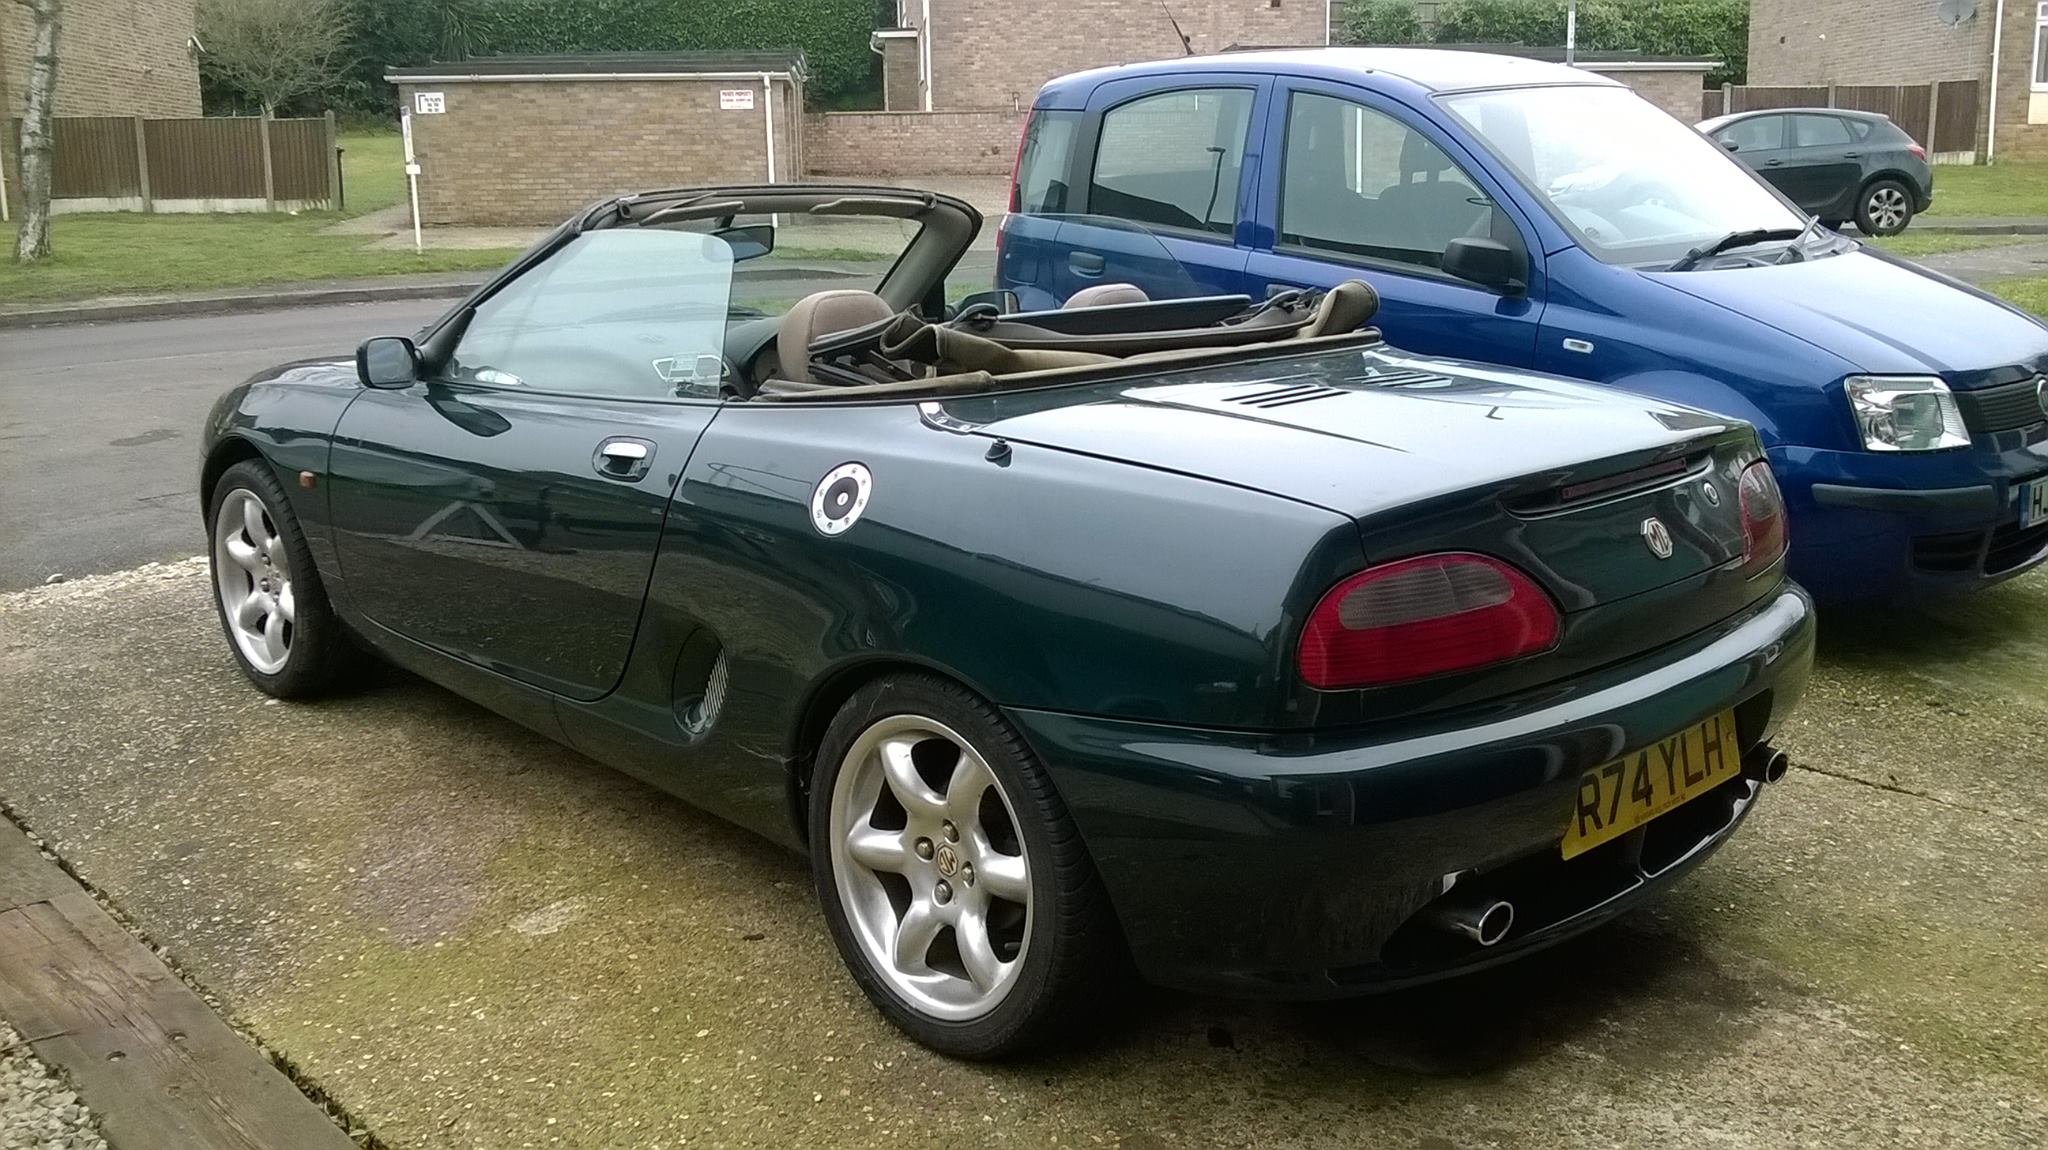 Show us your MG. - Page 4 - MG - PistonHeads